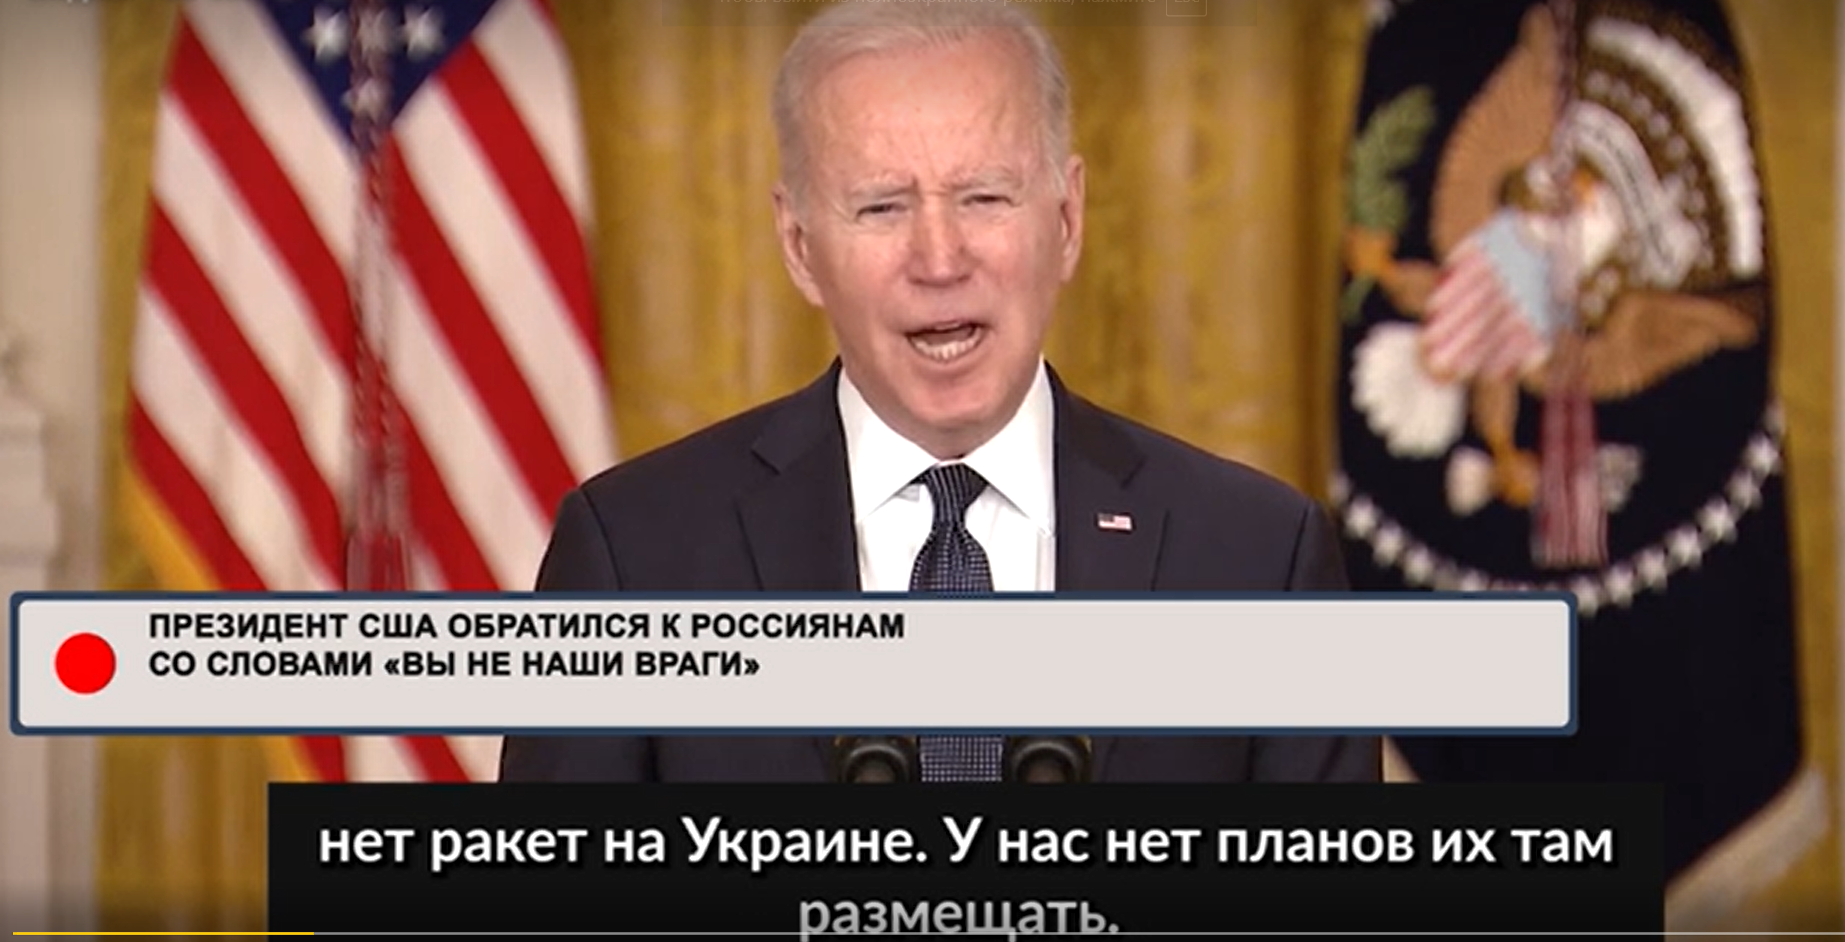 “He does not consider us people!” The network assessed Biden's appeal to the Russians